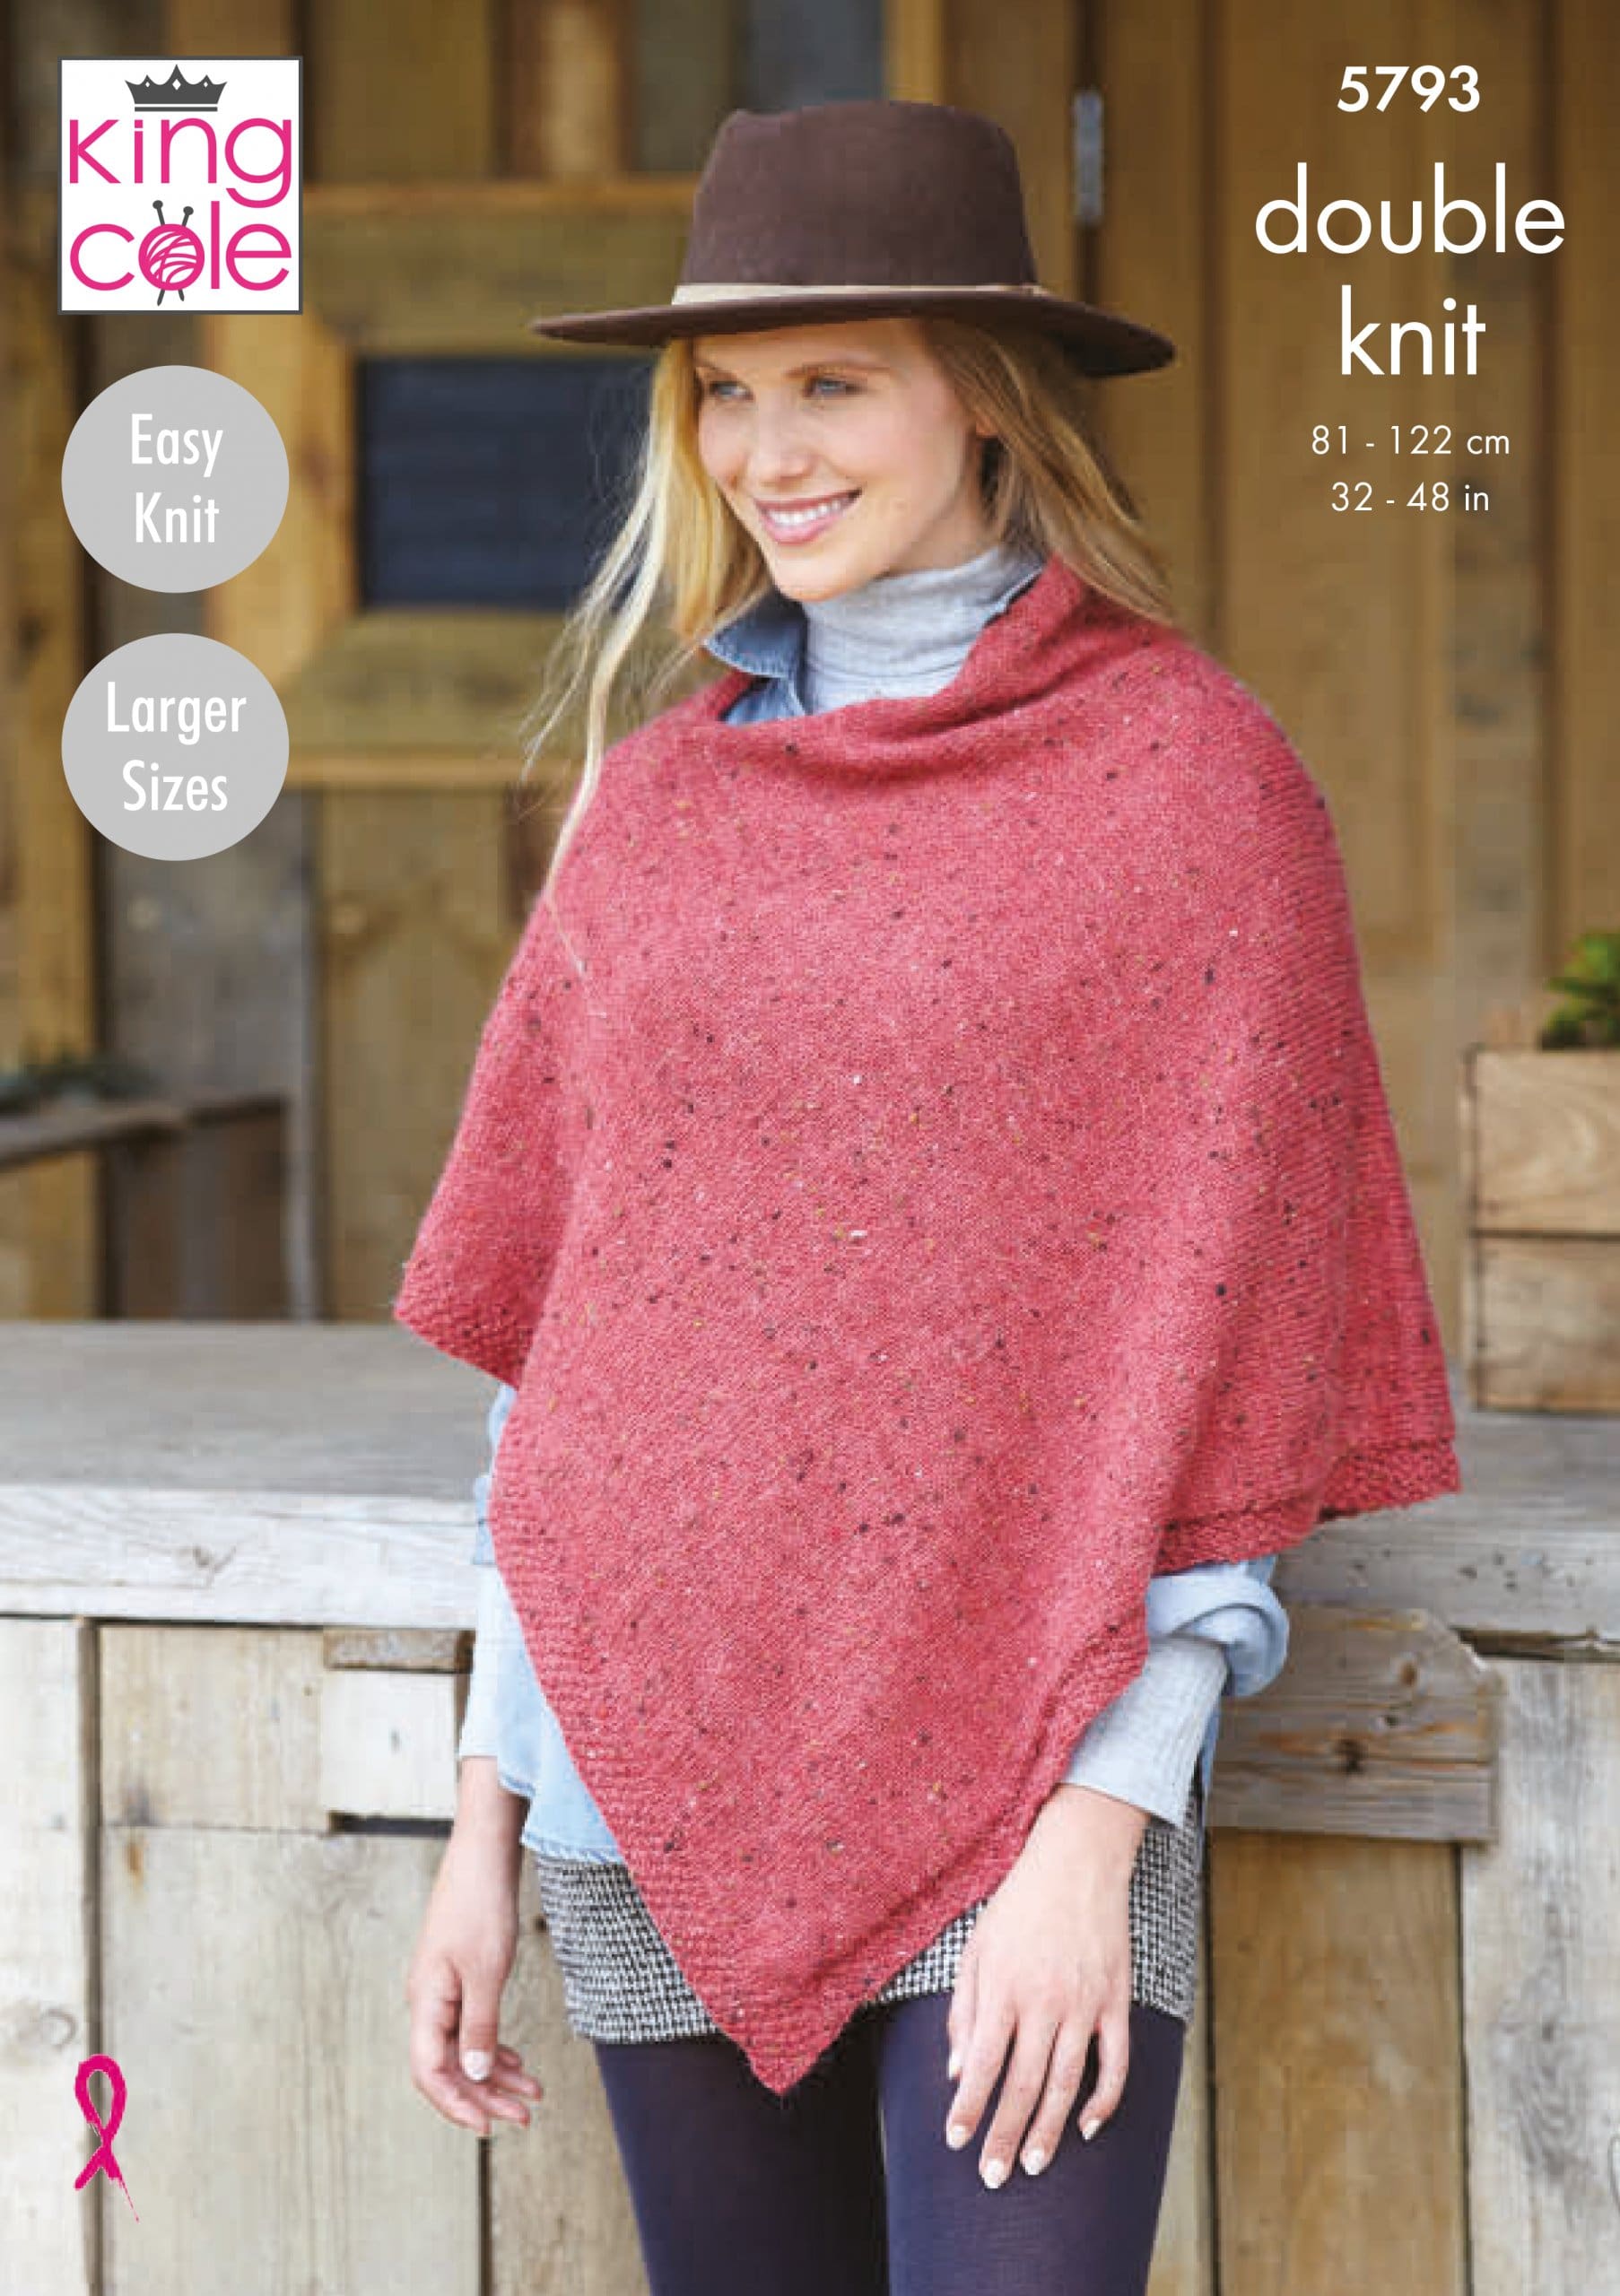 Easy to Follow Ponchos Knitted in Homespun DK Knitting Patterns - King Cole